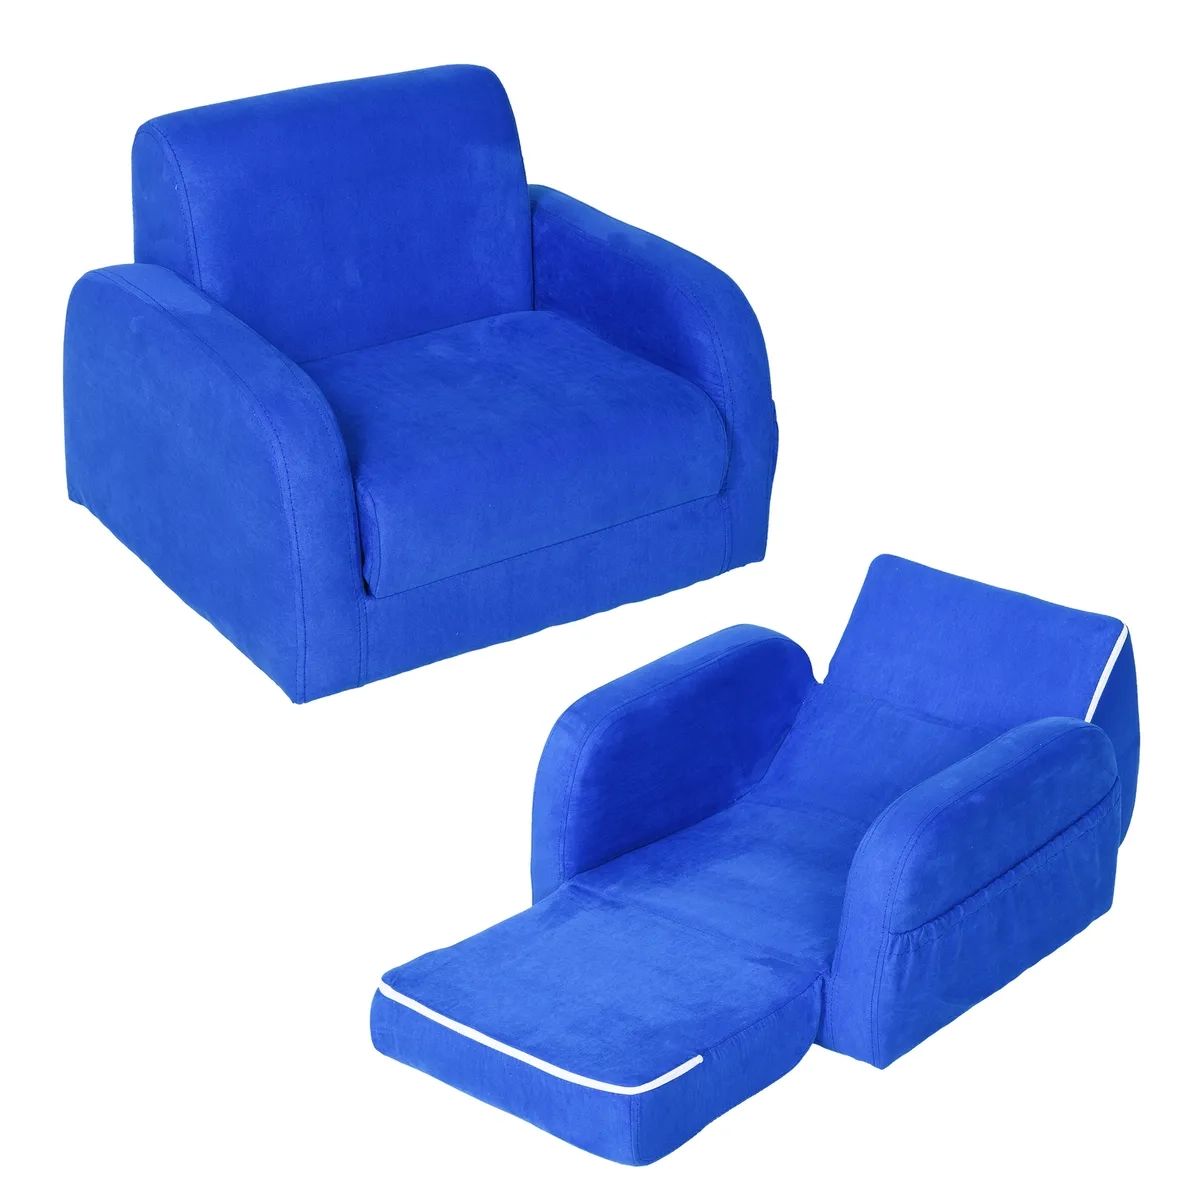 Homcom 2 In 1 Kids Armchair Sofa Bed Fold Out Padded Wood Frame Bedroom  Blue | Ebay Inside 2 In 1 Foldable Children'S Sofa Beds (Photo 6 of 15)